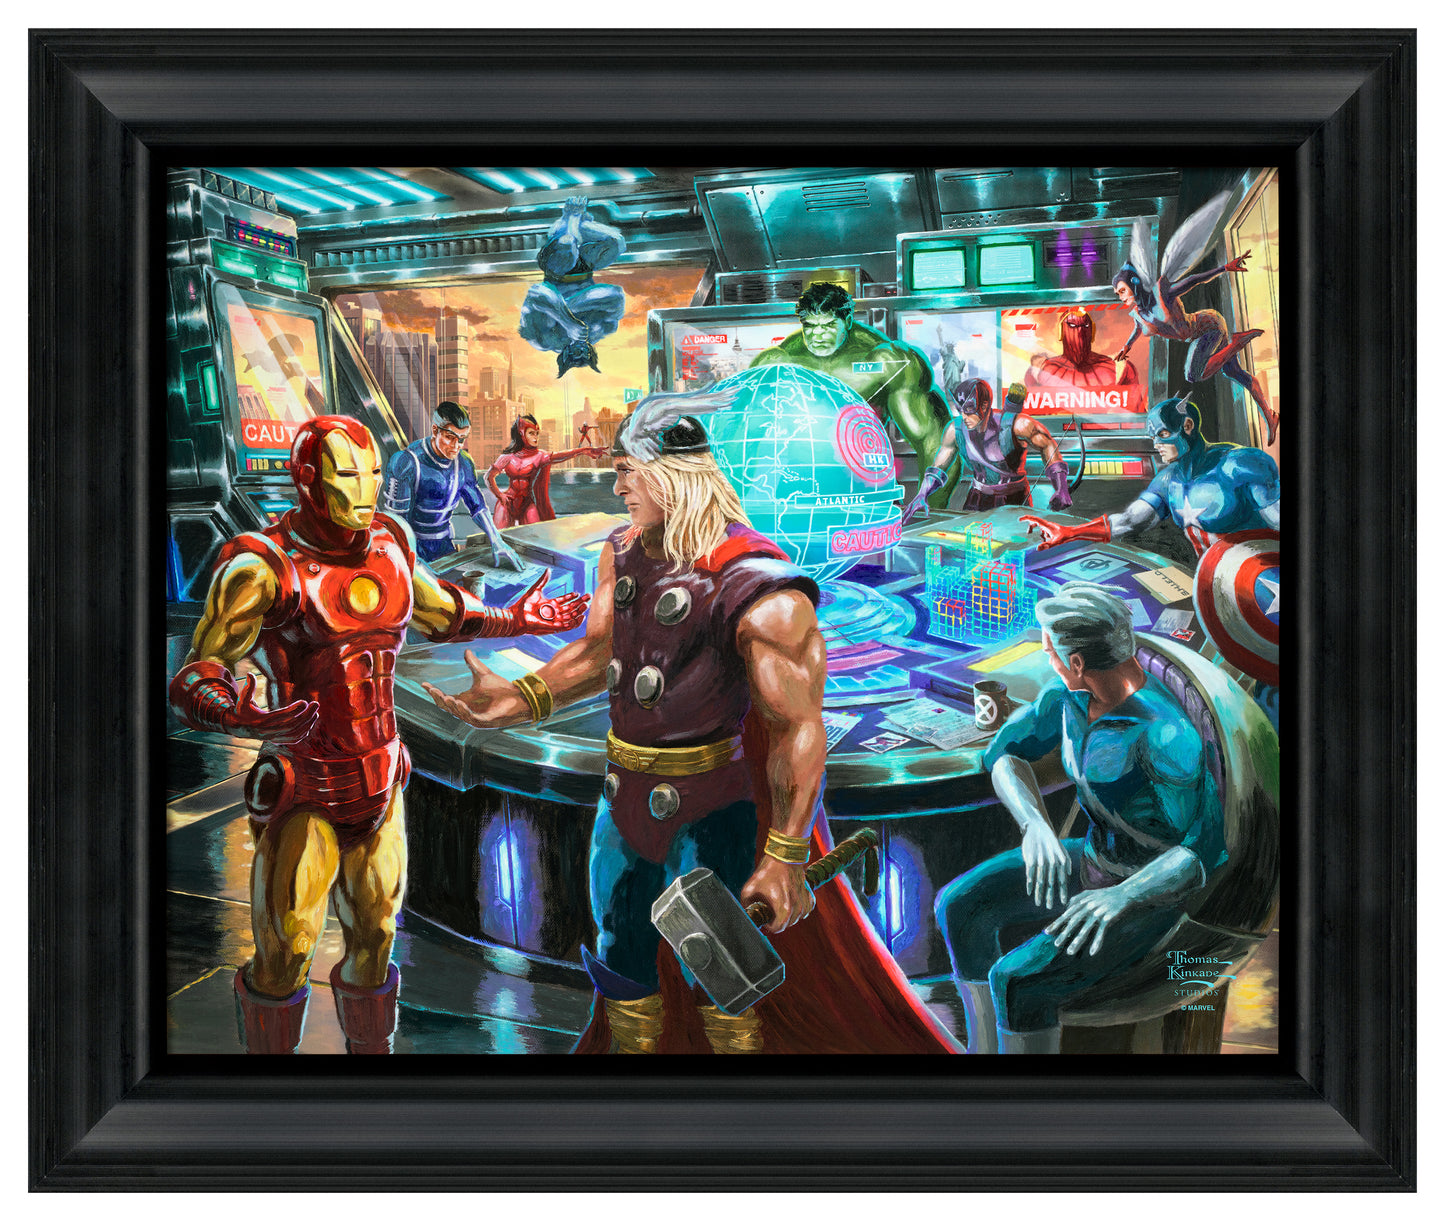 "Earth's Mightiest Heroes" are gathered inside the Avengers Mansion, formulating a plan to thwart Thanos' new threat to Earth. Framed